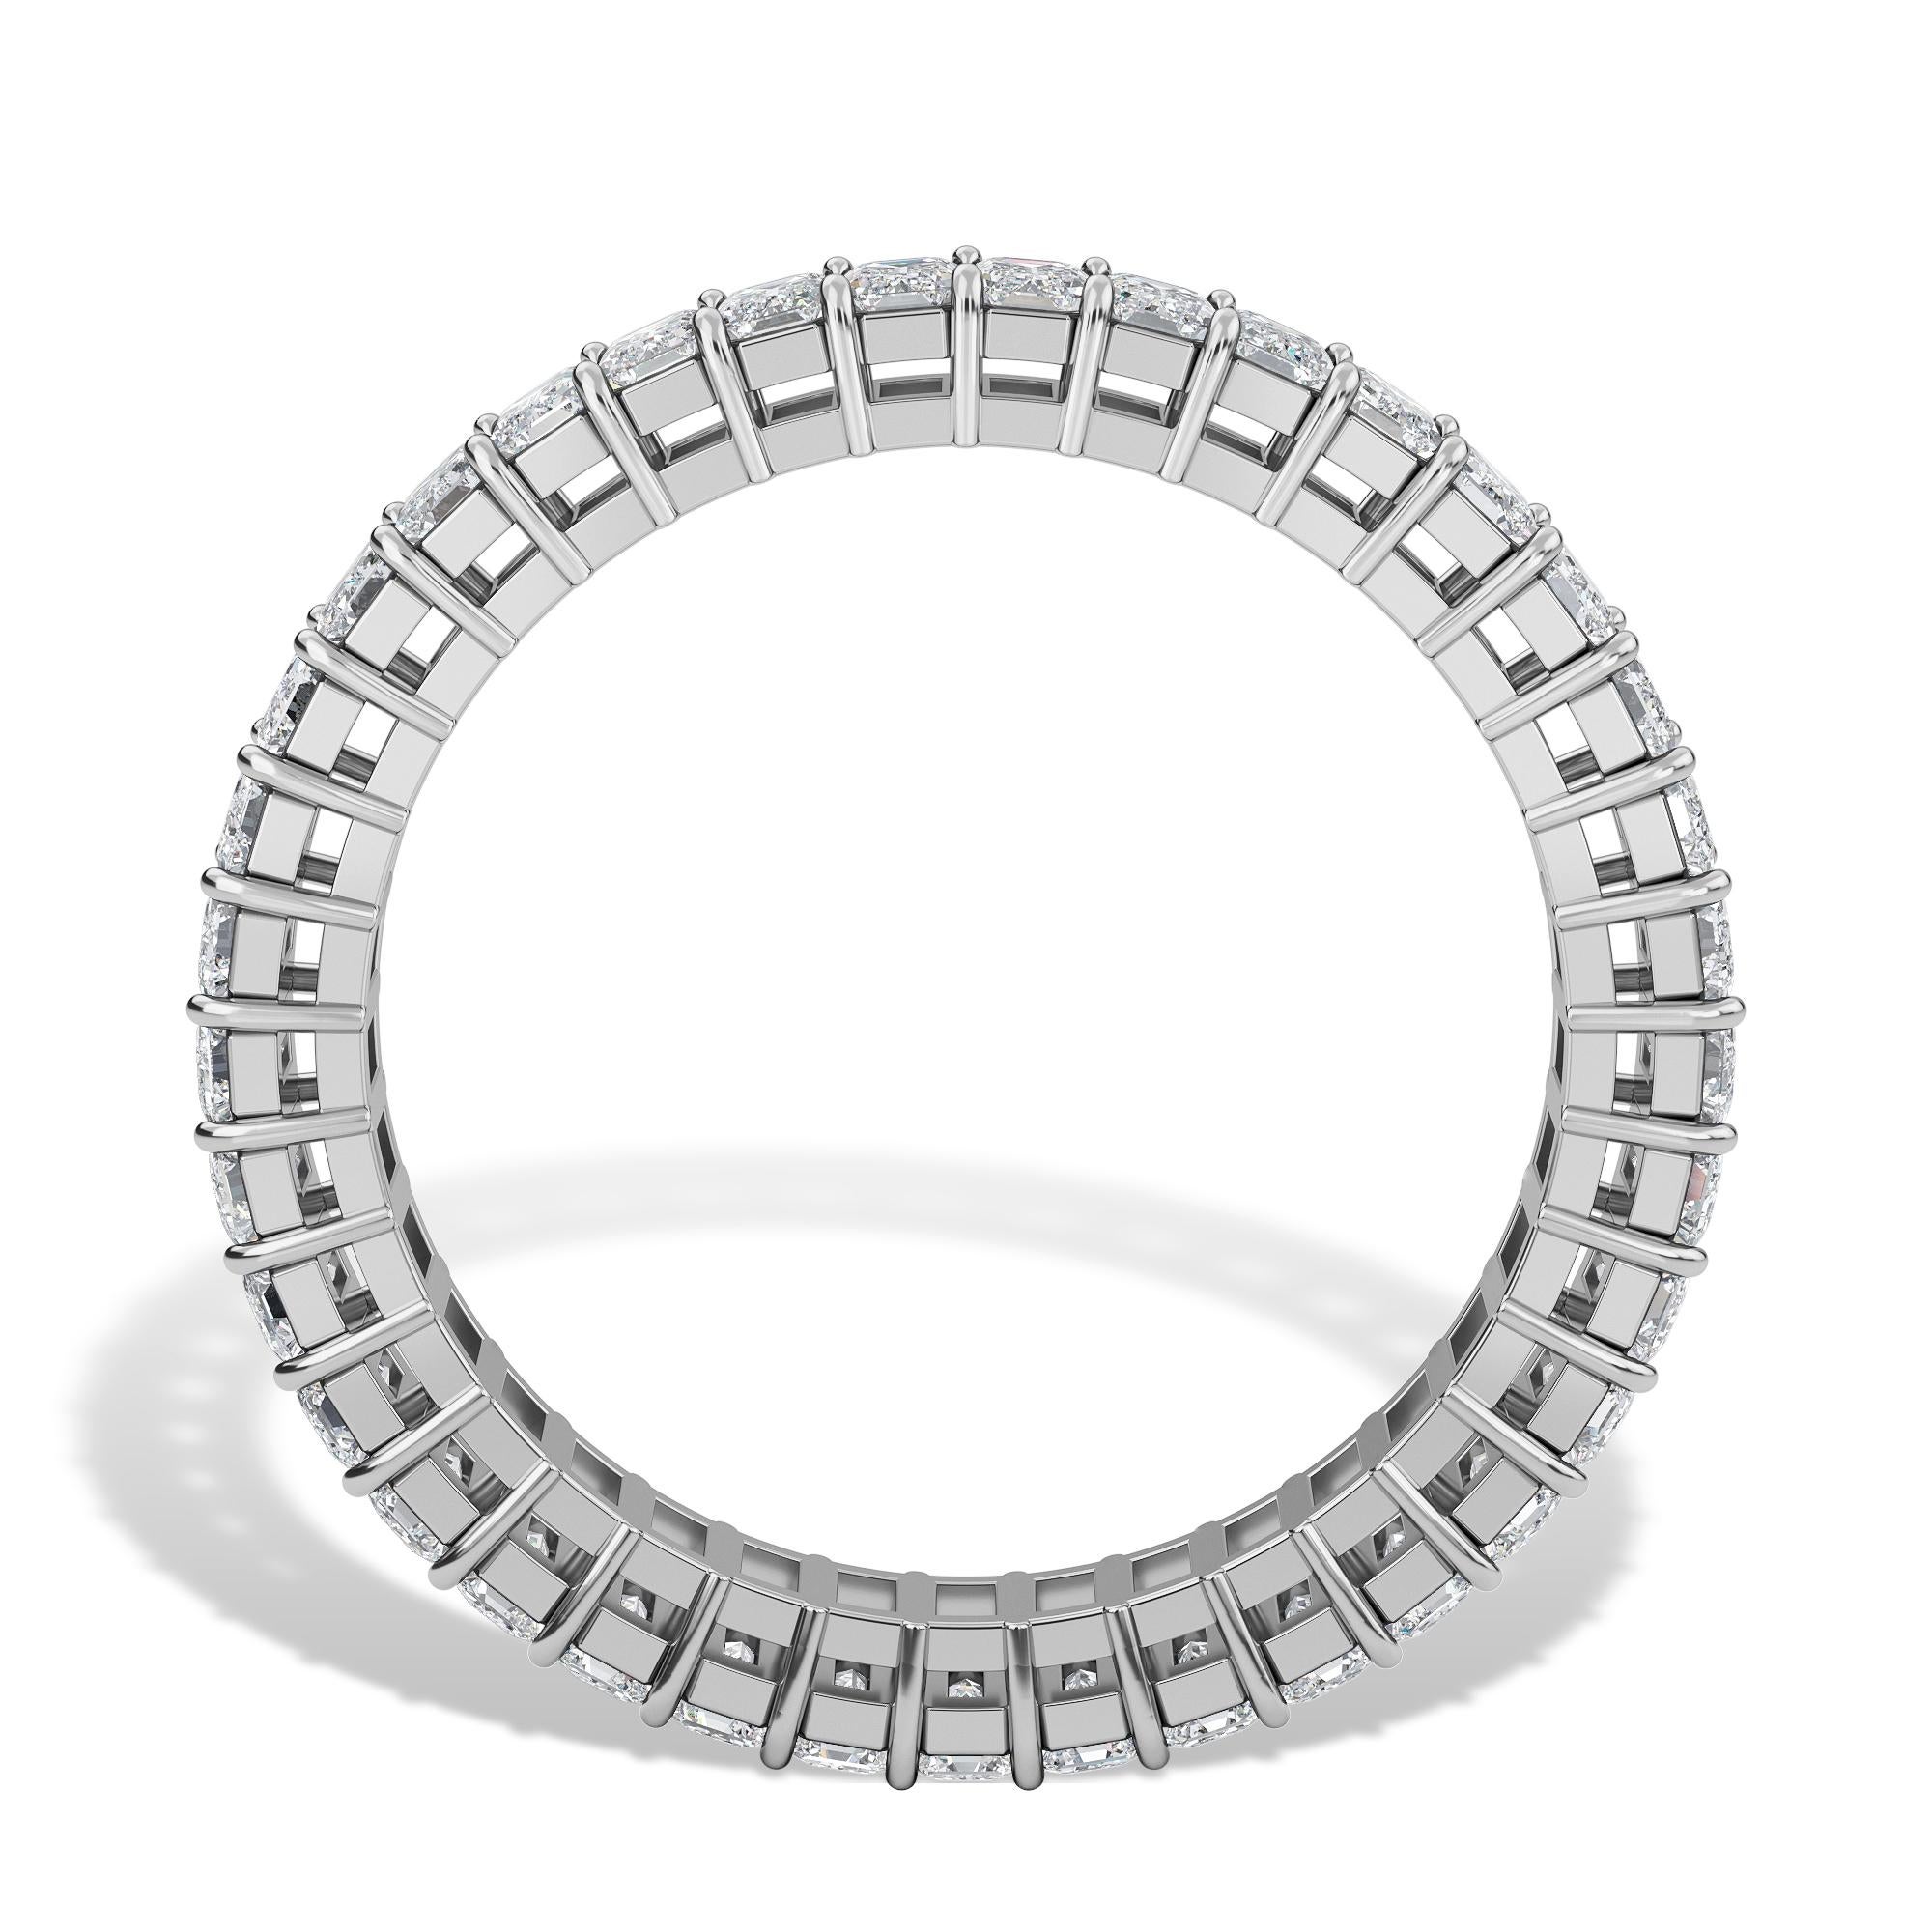 This Emerald Cut Diamond Eternity Band features 37 Emerald Cut Diamonds and weights 2.05 Total Carat Weight. These Emerald Cut diamonds are extremely elongated and are I Color and VS Clarity, set in Platinum in a finger size 6. 